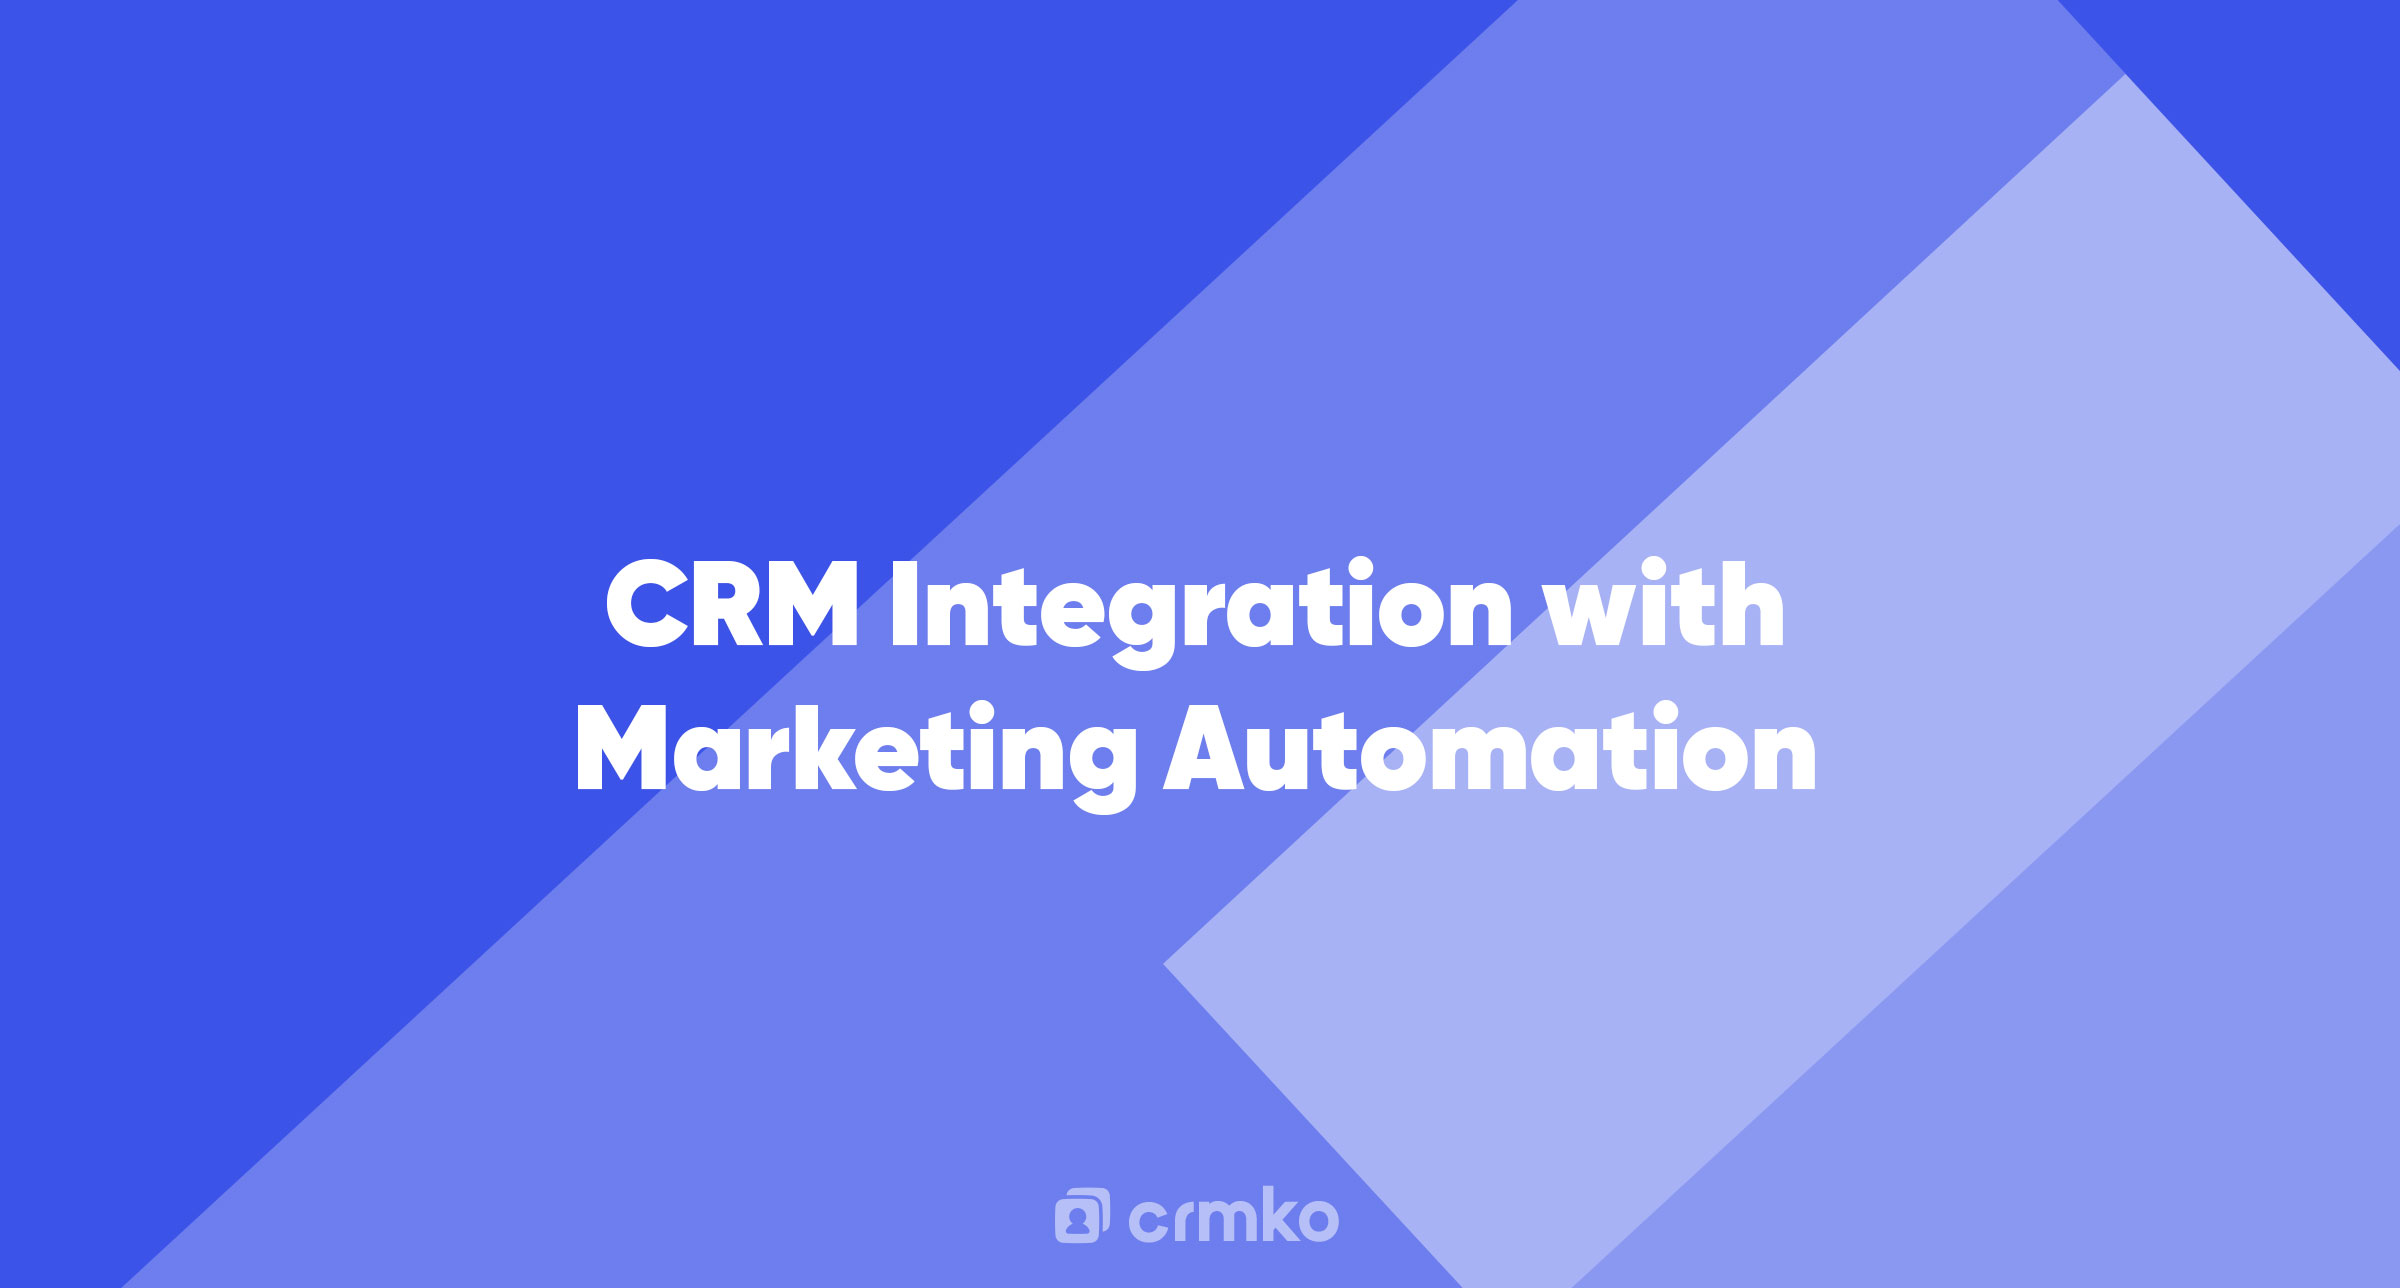 Article | CRM Integration with Marketing Automation